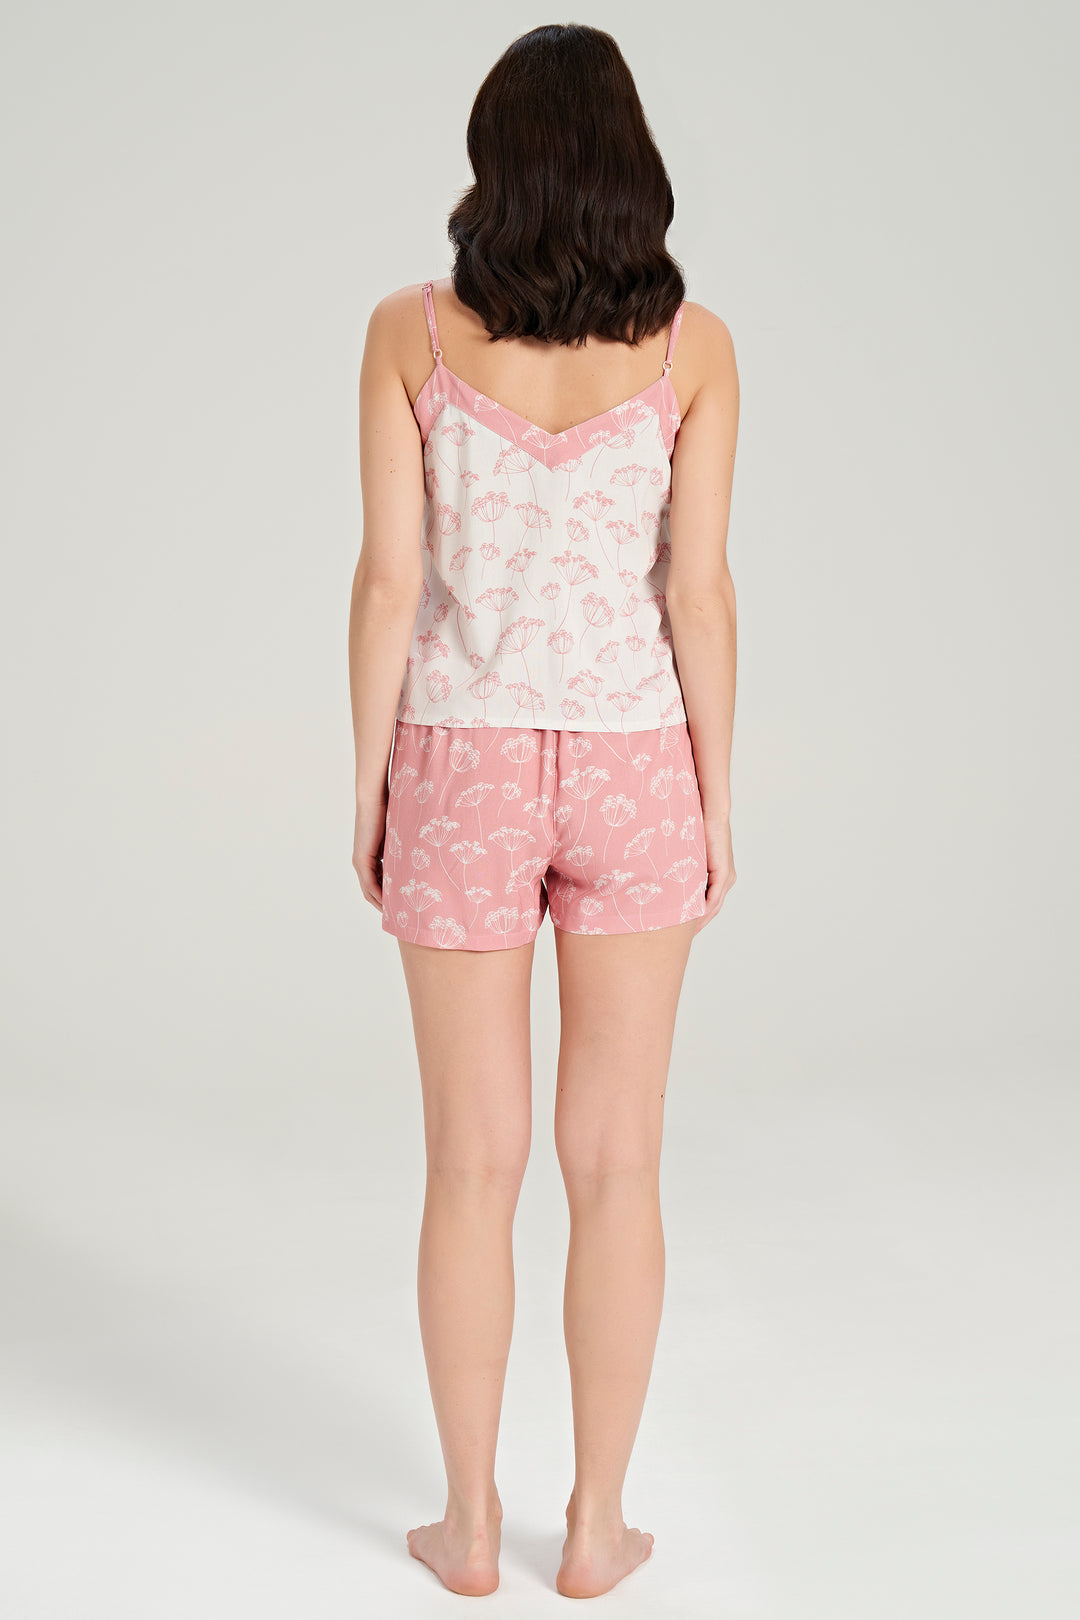 Woven Fine Floral Shorts and Tank Top Set